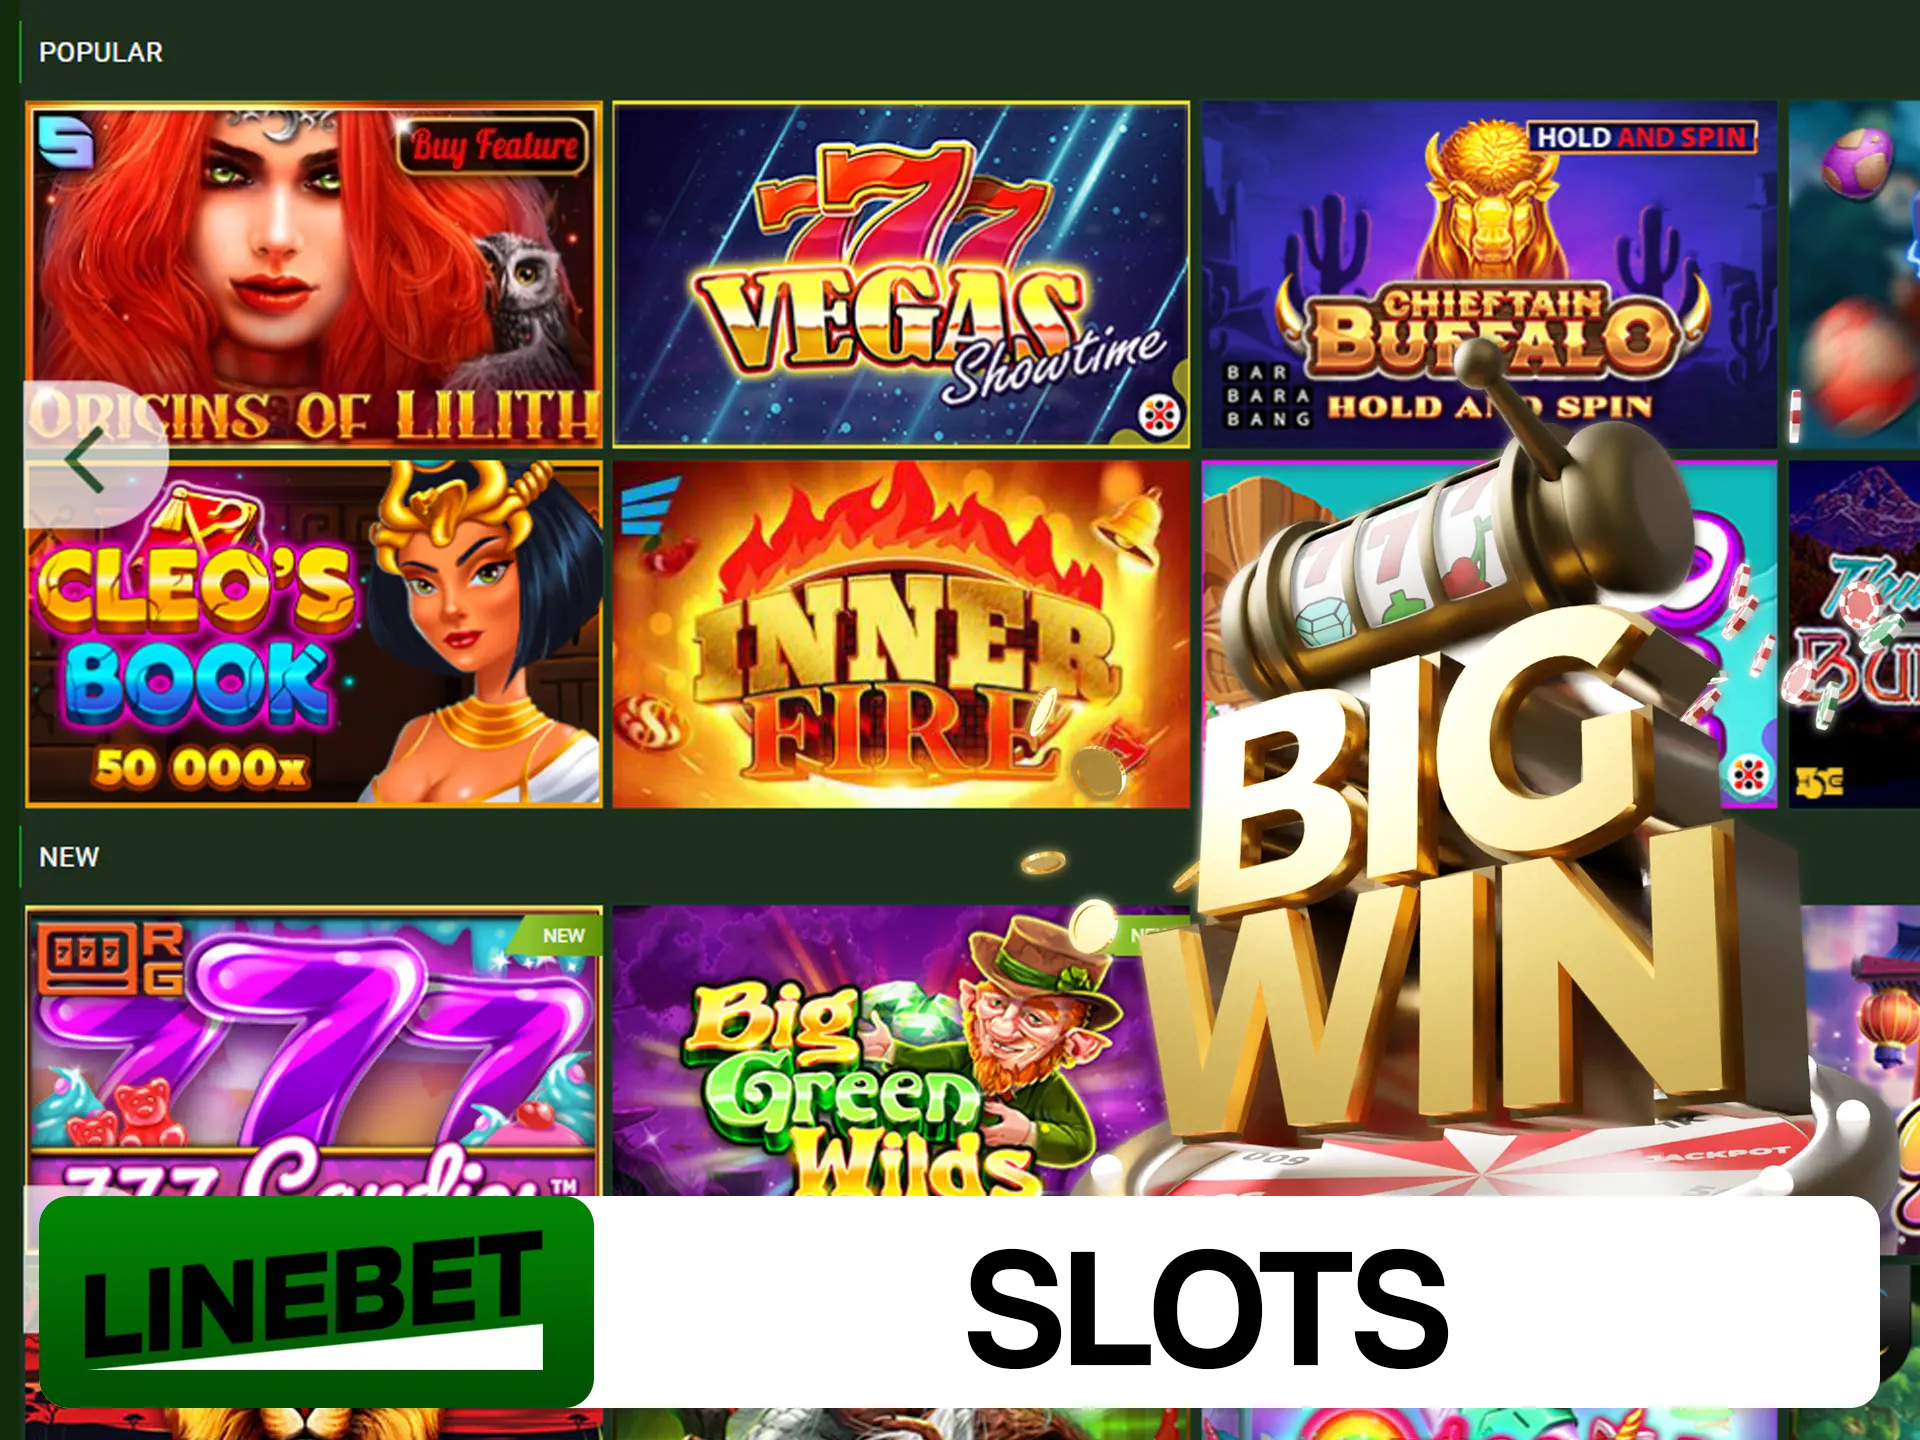 Search for your favourite Linebet slots on slots page.